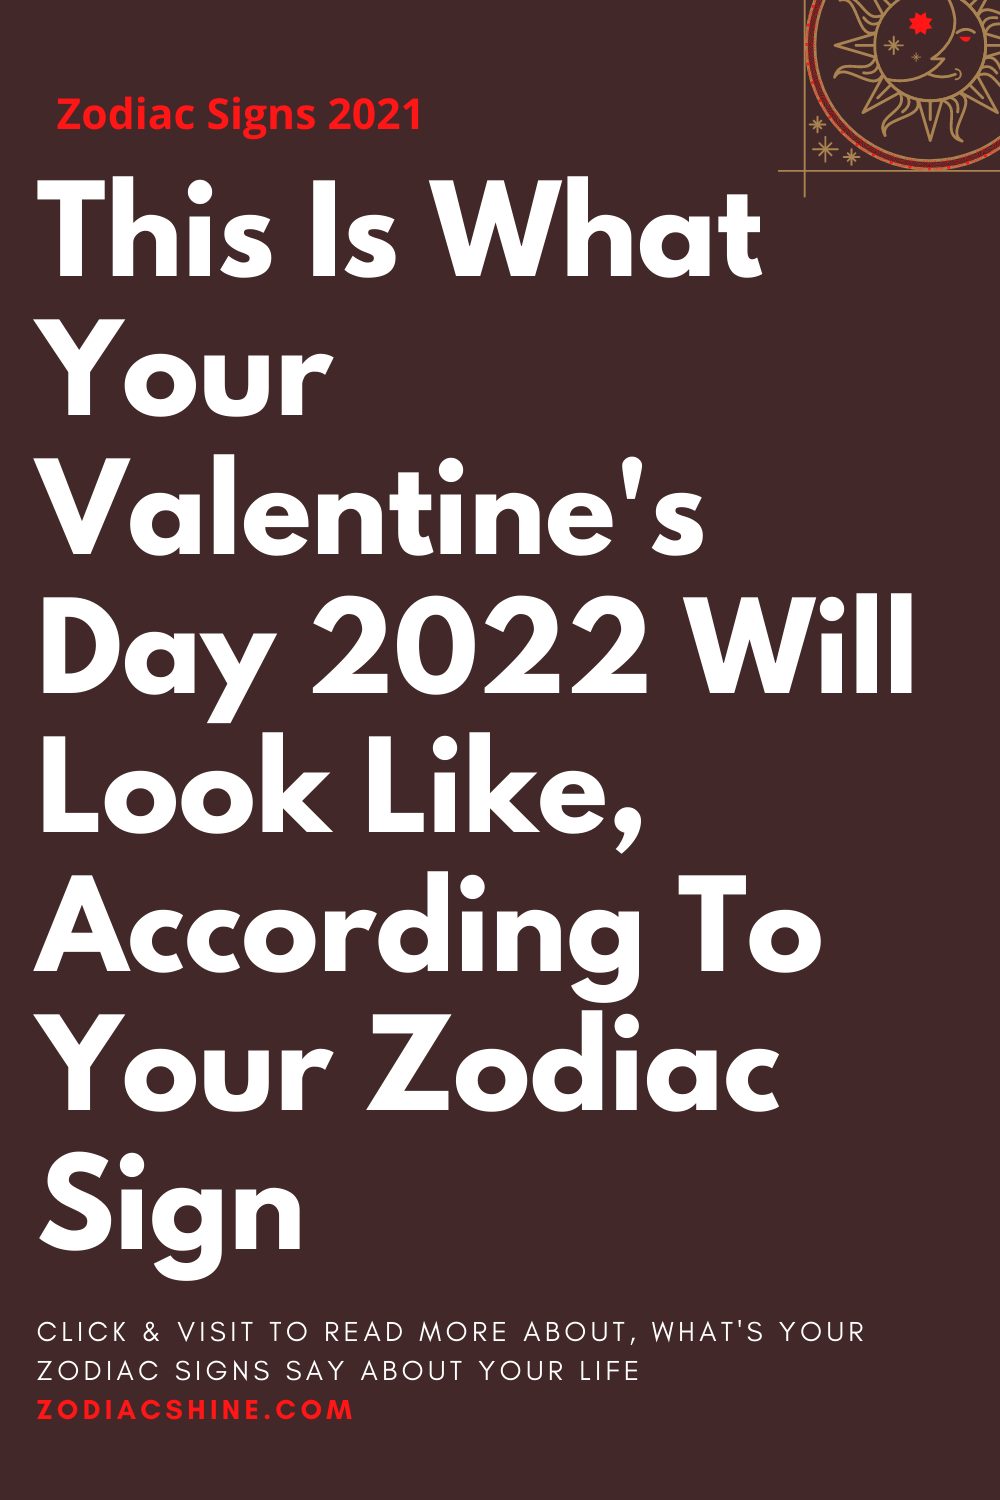 This Is What Your Valentine's Day 2022 Will Look Like According To Your Zodiac Sign